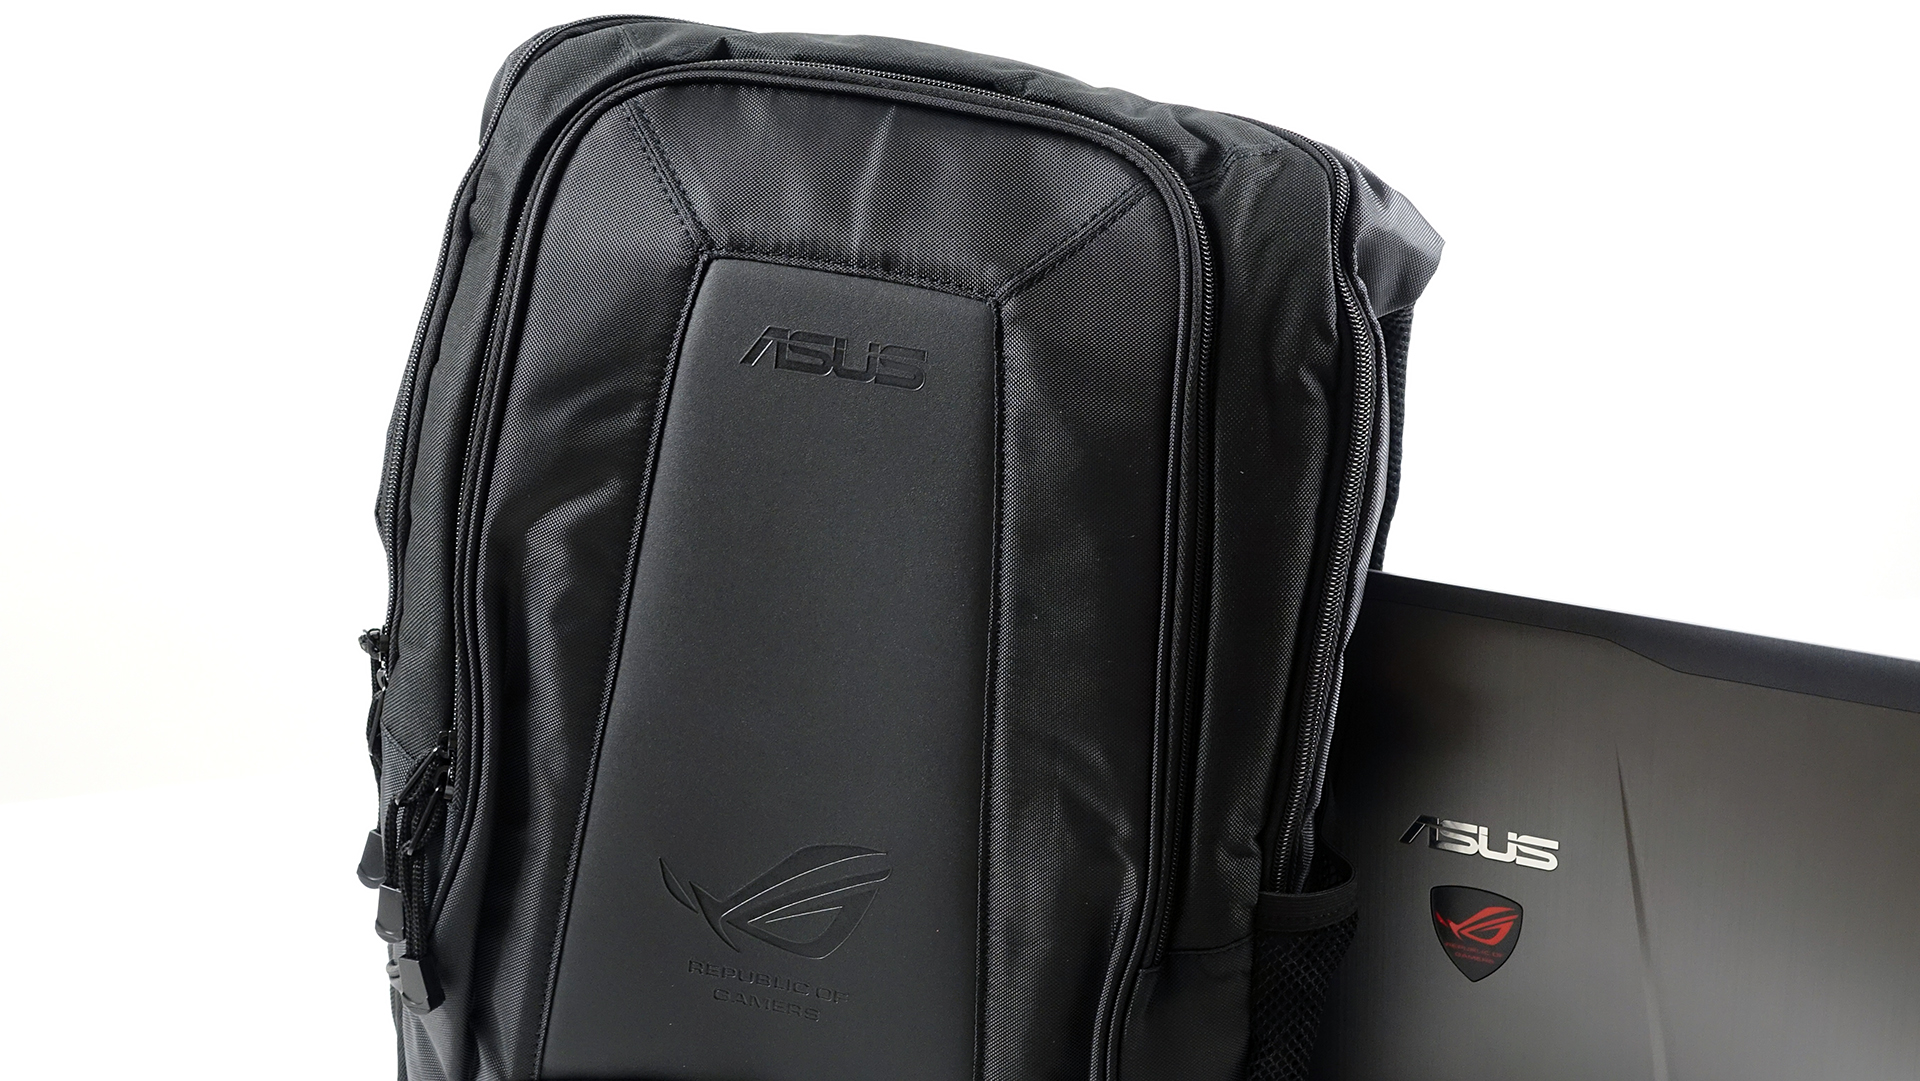 ASUS ROG G552 (or rebranded GL552) review - a step up from the GL552 ...